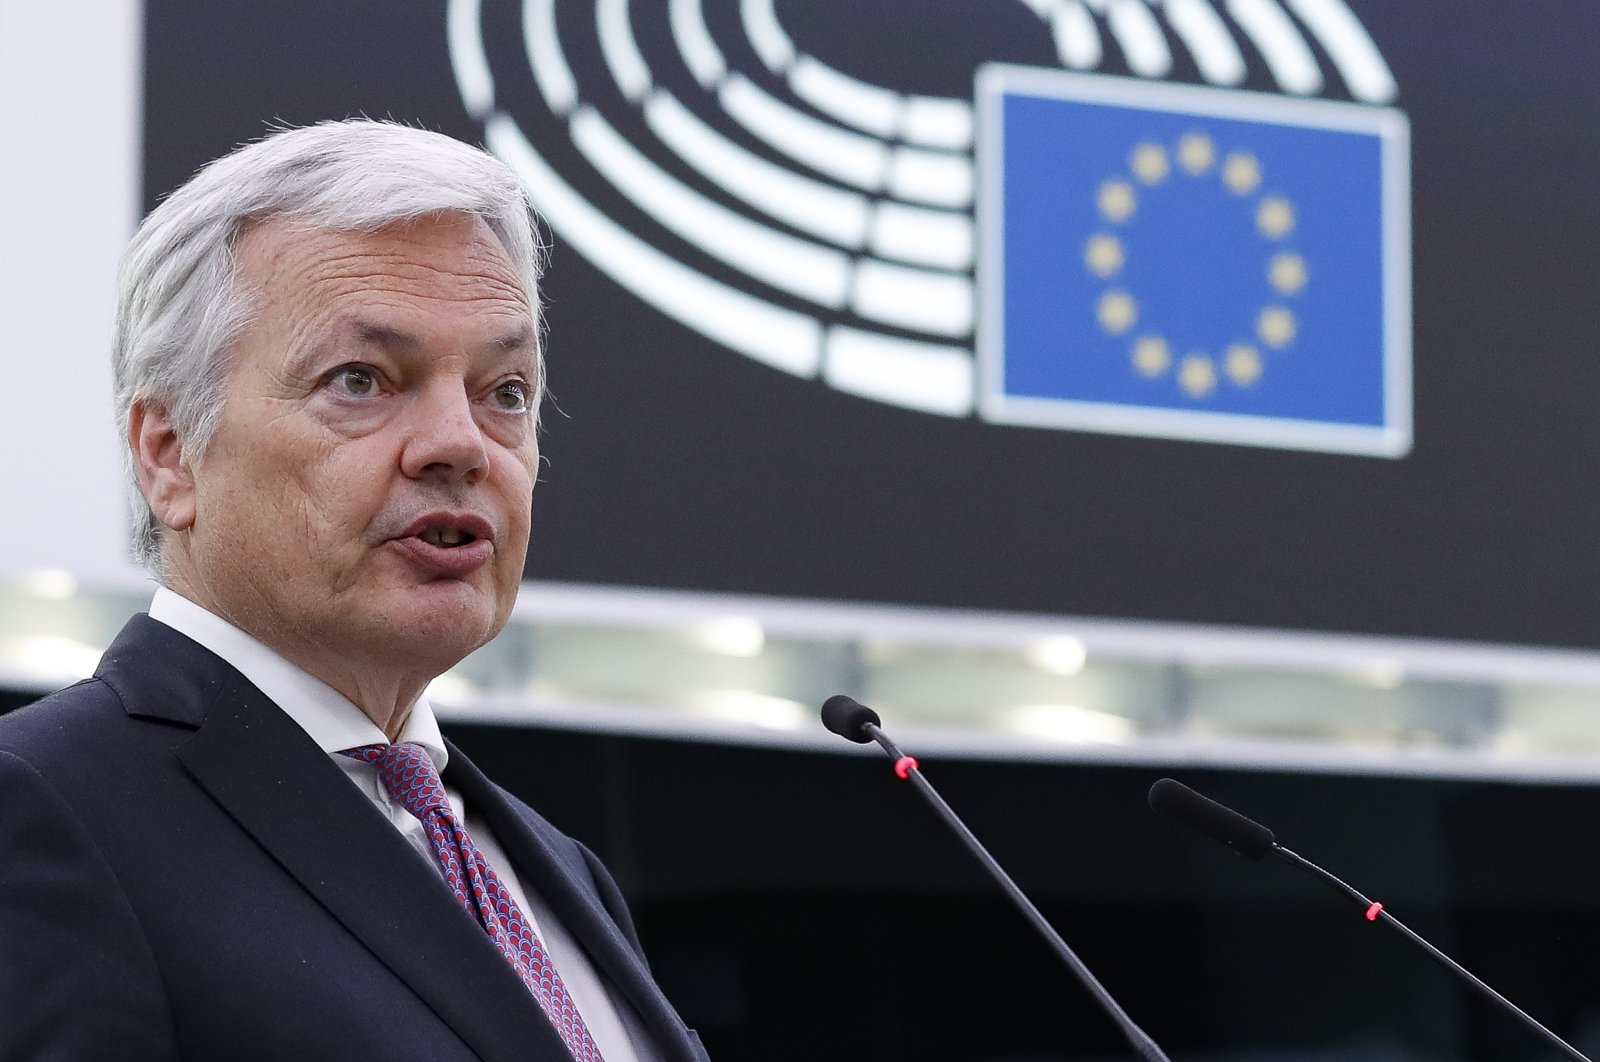 European Commissioner for Justice Didier Reynders delivers a speech on the ongoing hearings under Article 7(1) TEU regarding Poland and Hungary, at the European Parliament in Strasbourg, France, May 3, 2022. (EPA Photo)